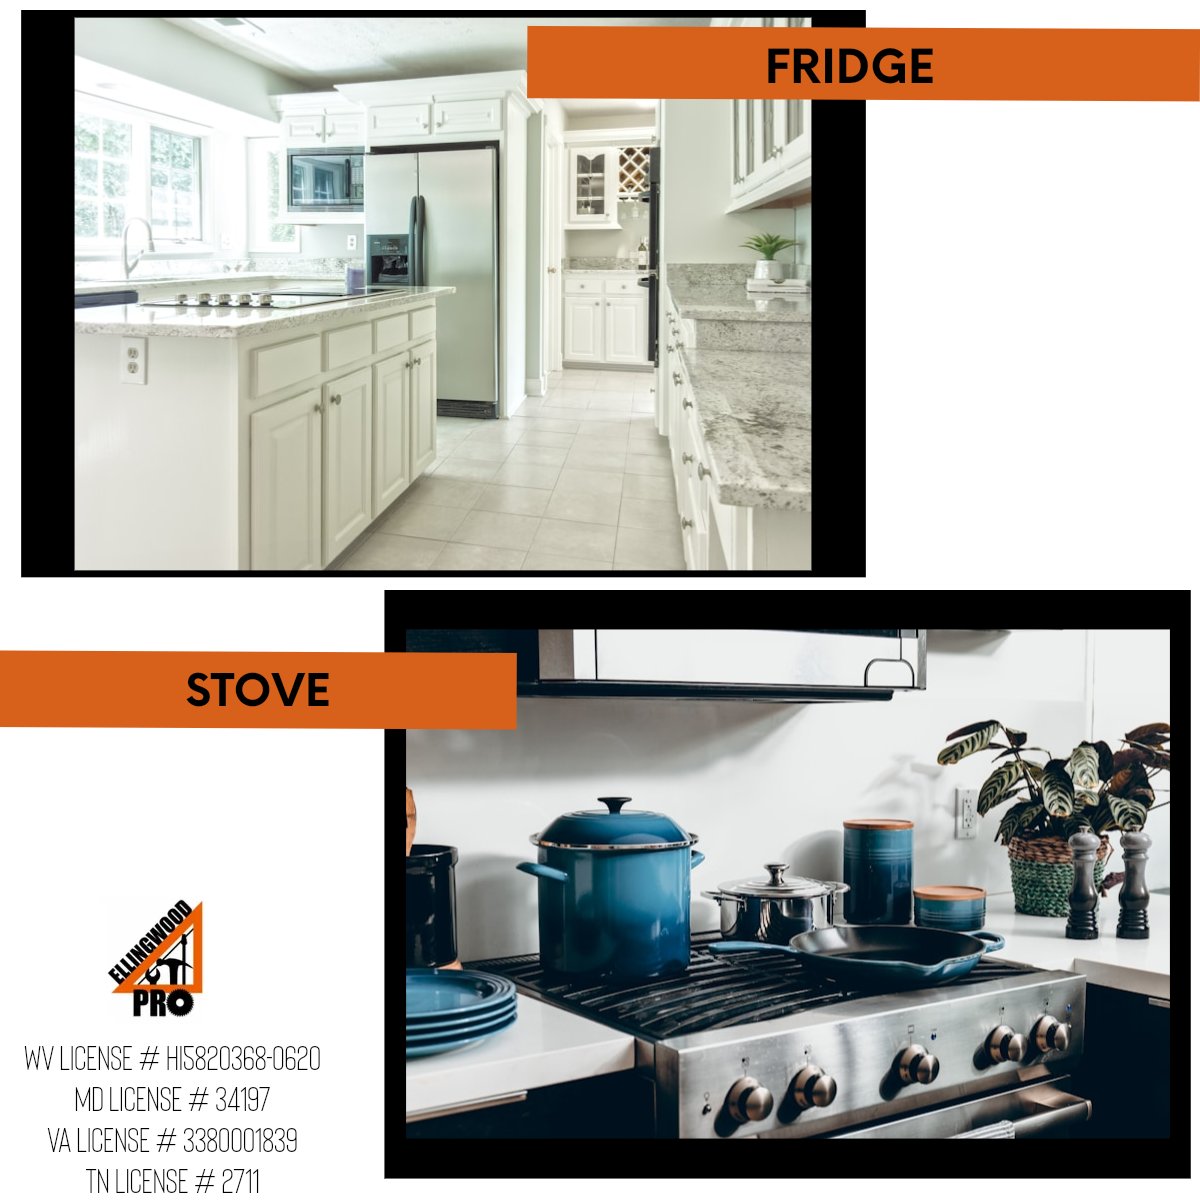 🏠 #ThisorThatThursday! 🤔 When it comes to upgrading your kitchen, which appliance would you prioritize? 🍳 Your Stove OR ❄️ Your Fridge? Share your appliance aspirations in the comments! 🥘

#inspectb4ubuy #ellingwoodpro #homeinspections #RealEstate #KitchenUpgrade #ThisorThat